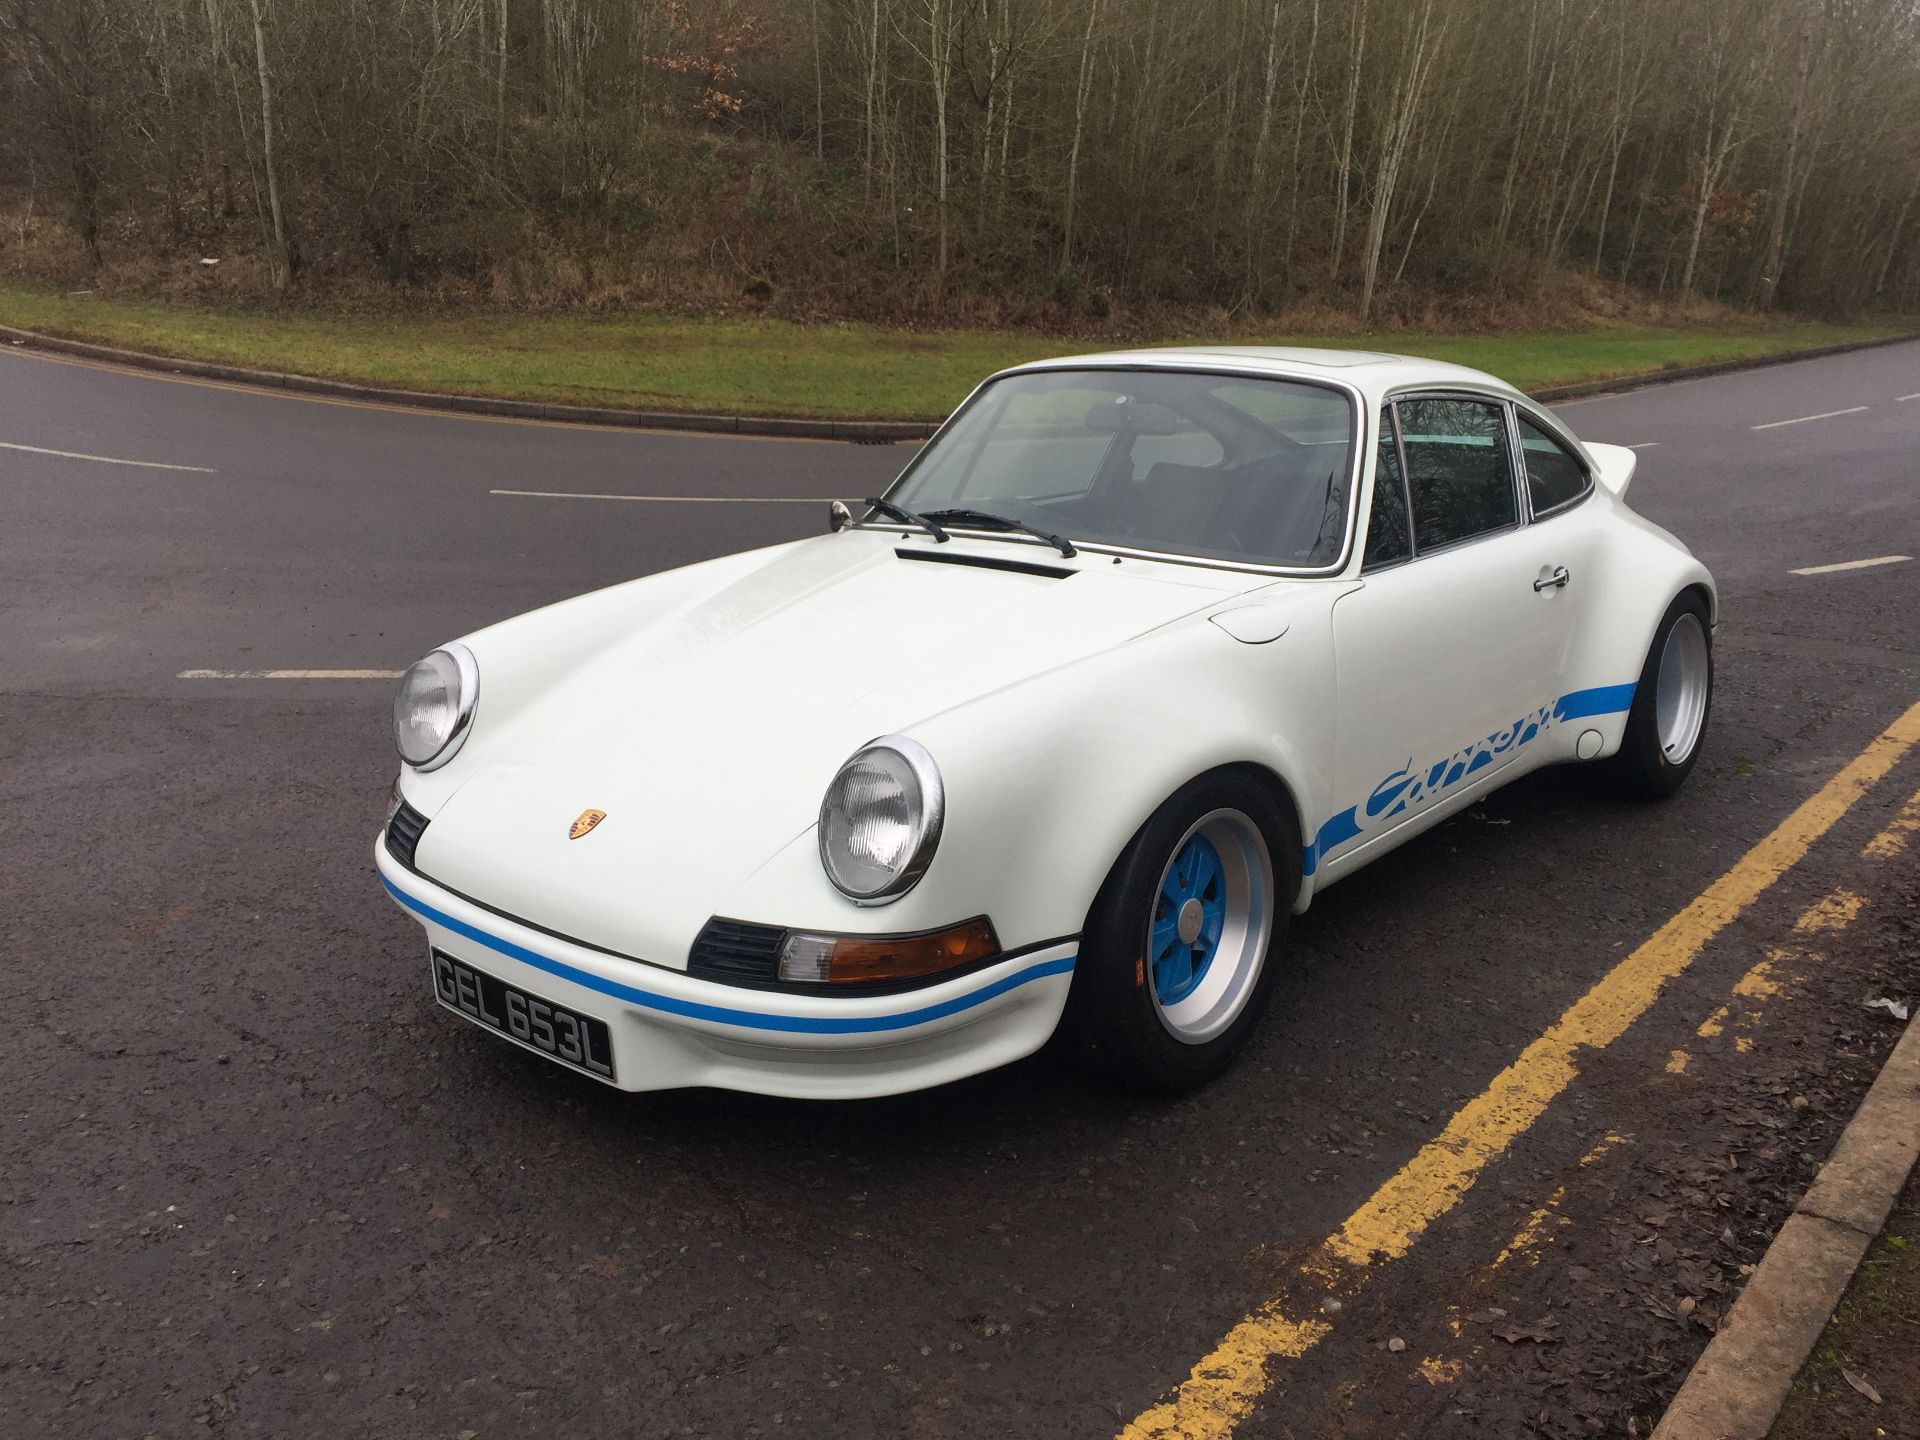 Porsche 911 Carrera 2.7 Rs Recreation - Pro 9 Build Based On A 1986 Porsche 911 **Reserve reduced** - Image 13 of 21